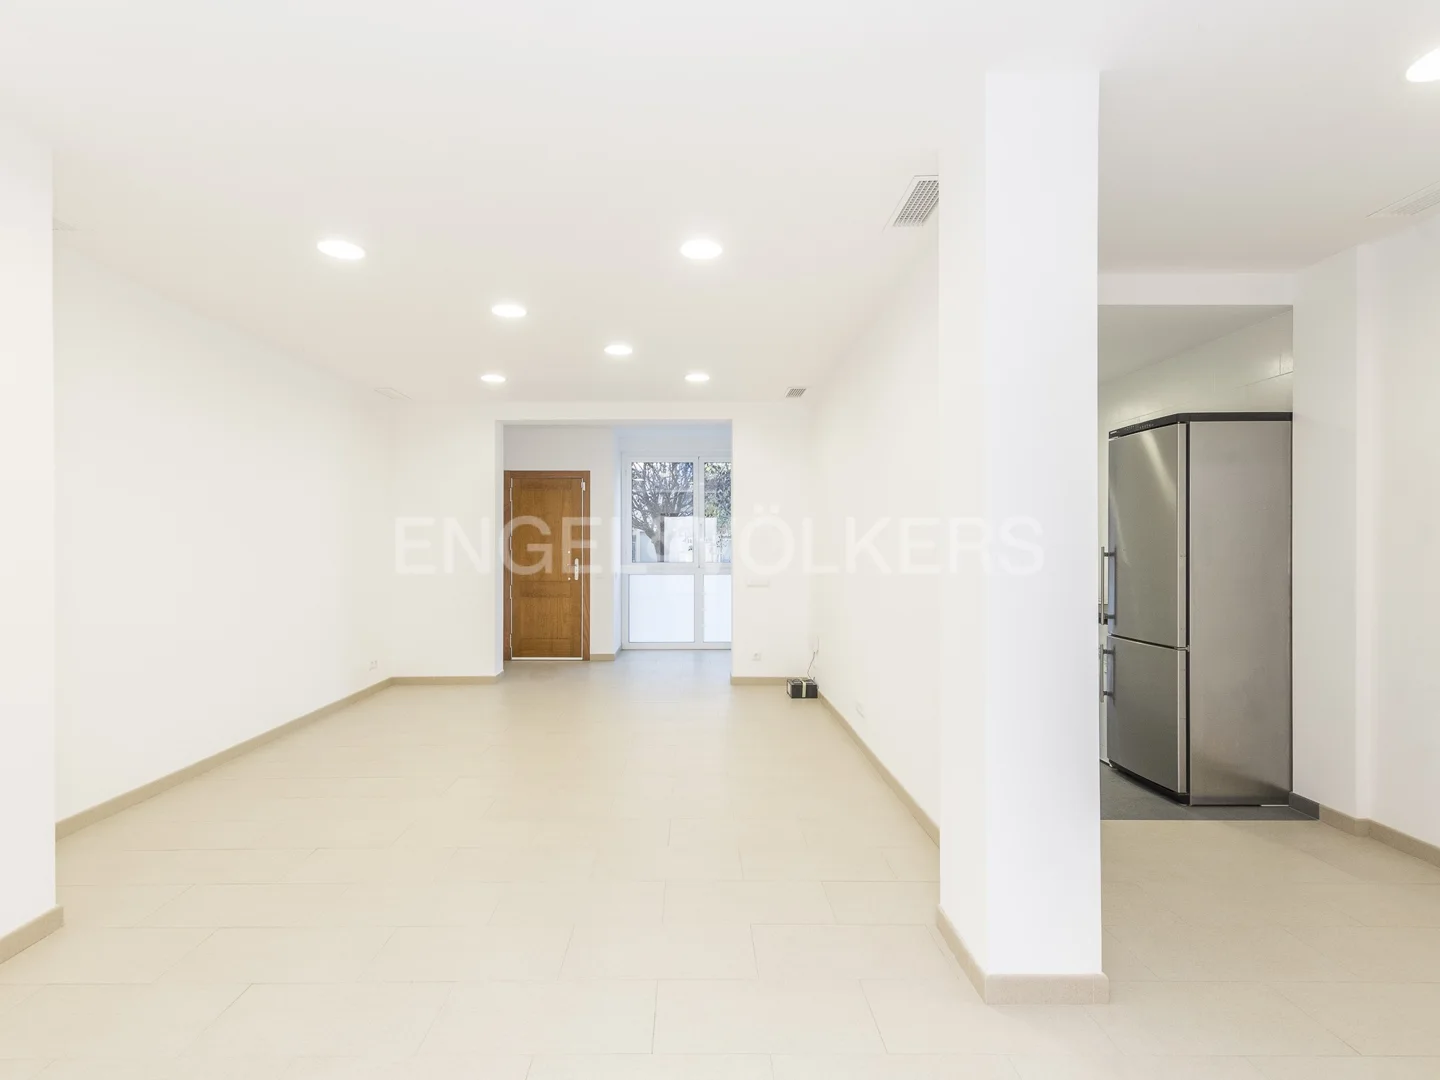 Nice apartment and premises with brand-new parking in Vallirana